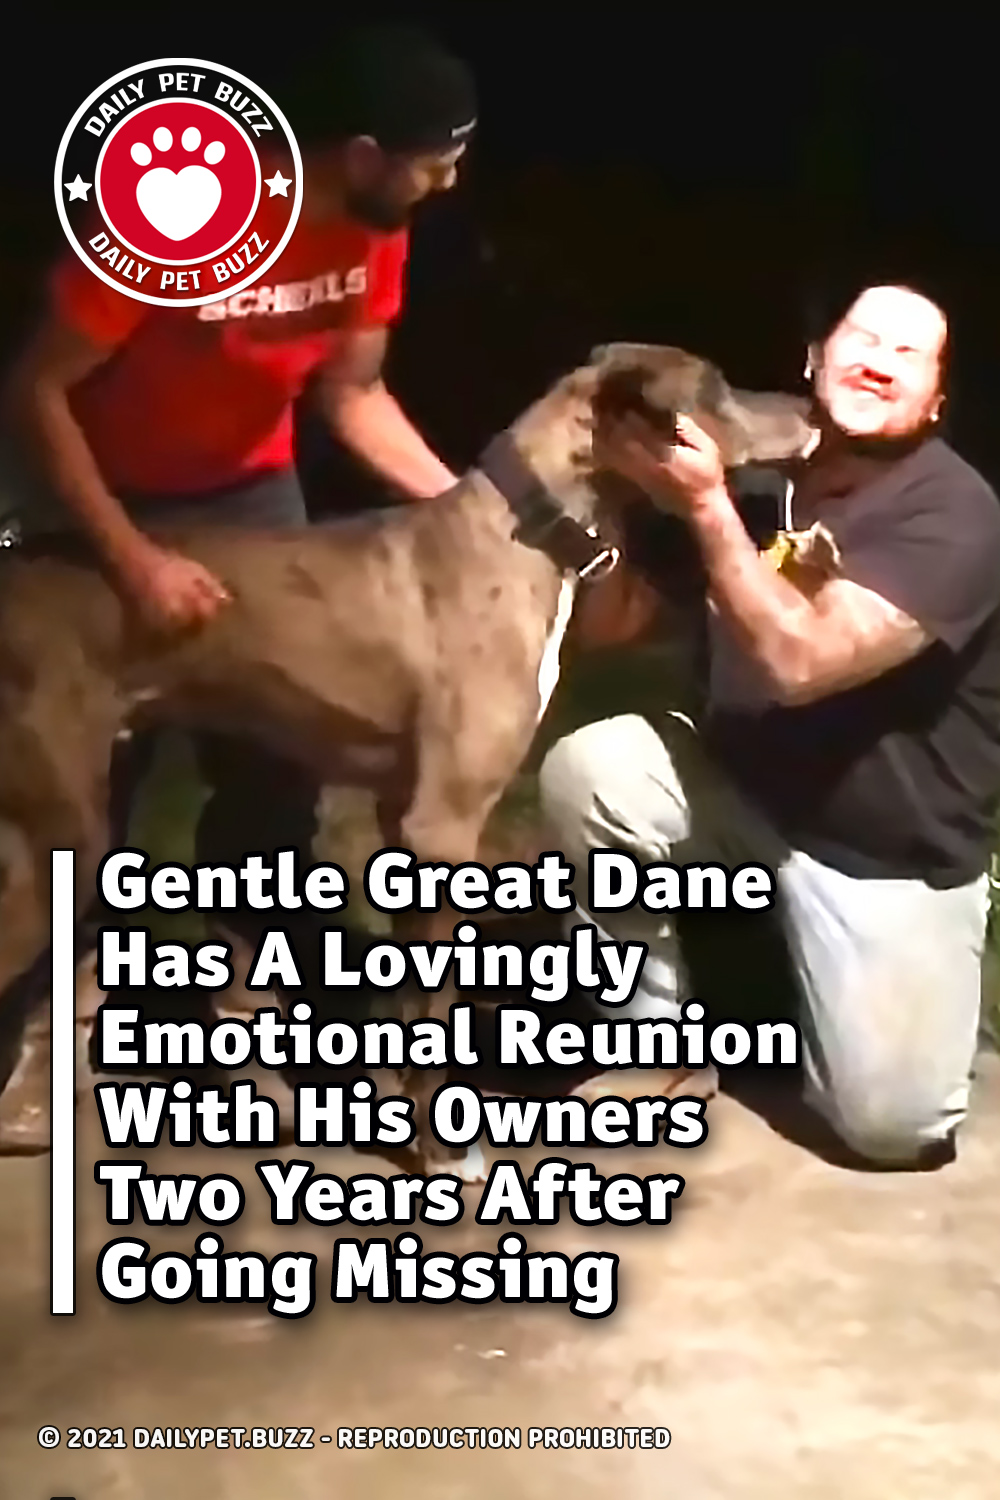 Gentle Great Dane Has A Lovingly Emotional Reunion With His Owners Two Years After Going Missing